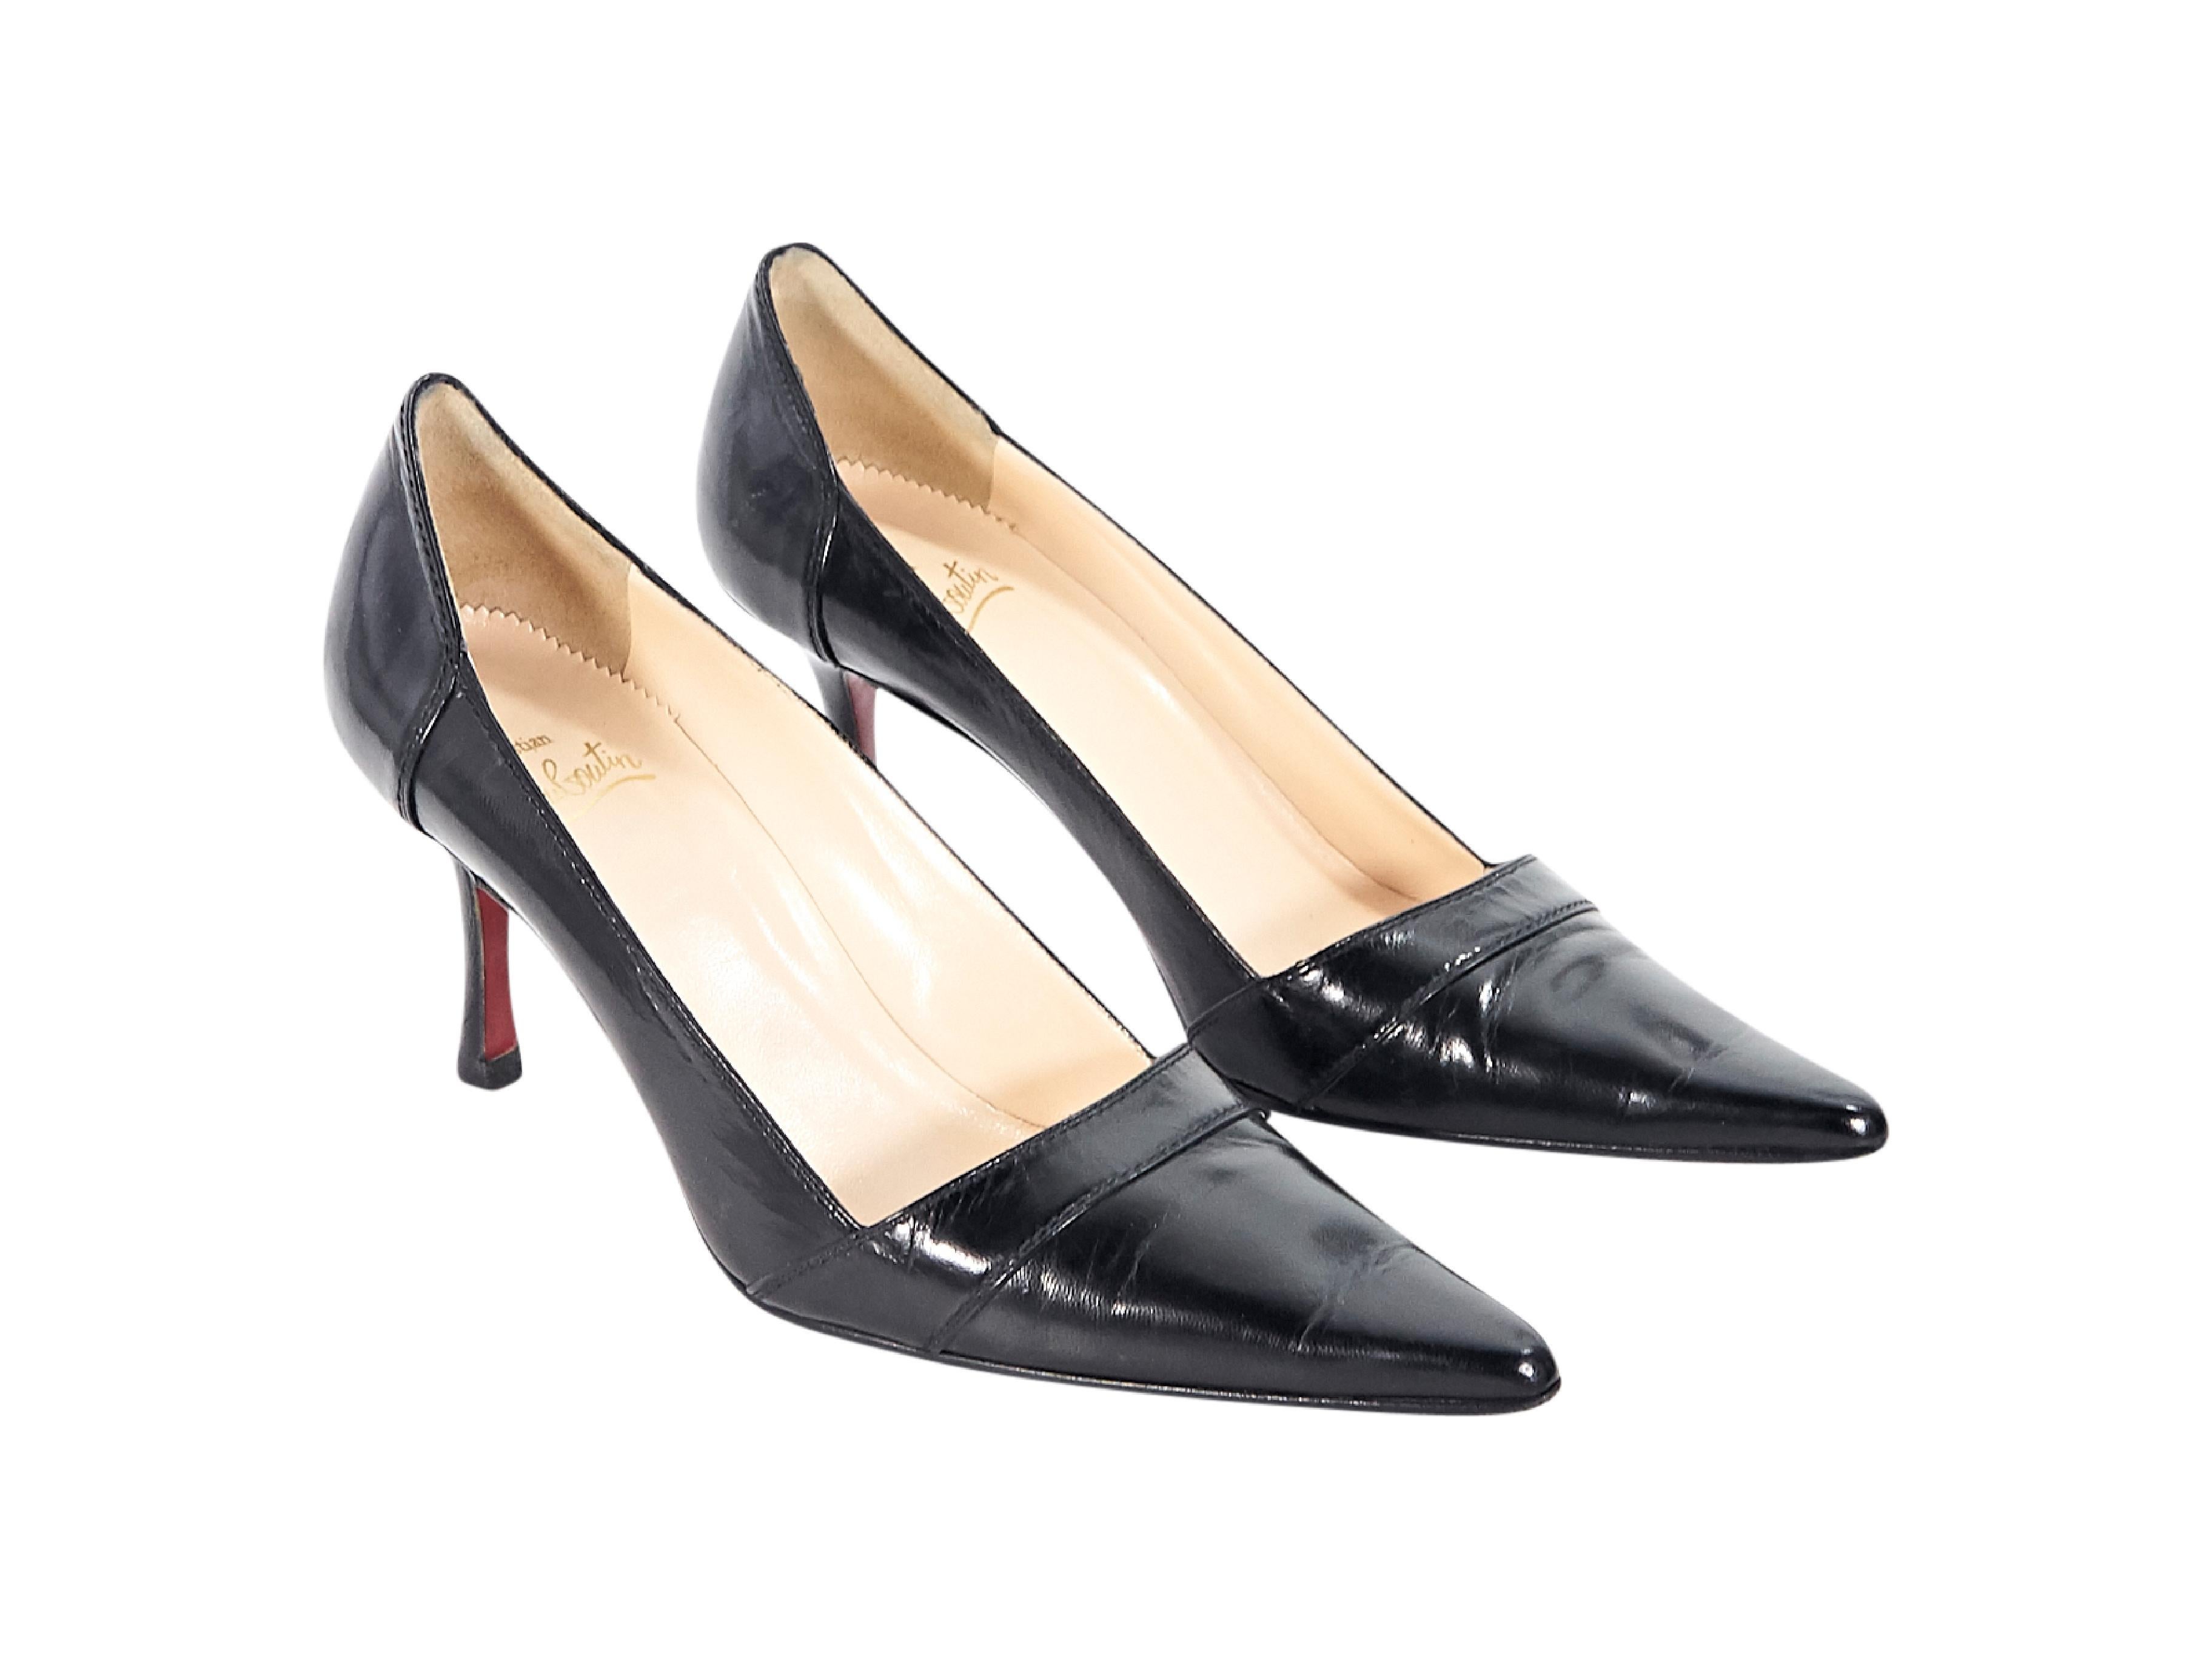 Product details:  Black leather pumps by Christian Louboutin.  Point toe.  Iconic red sole.  Slip-on style.  3